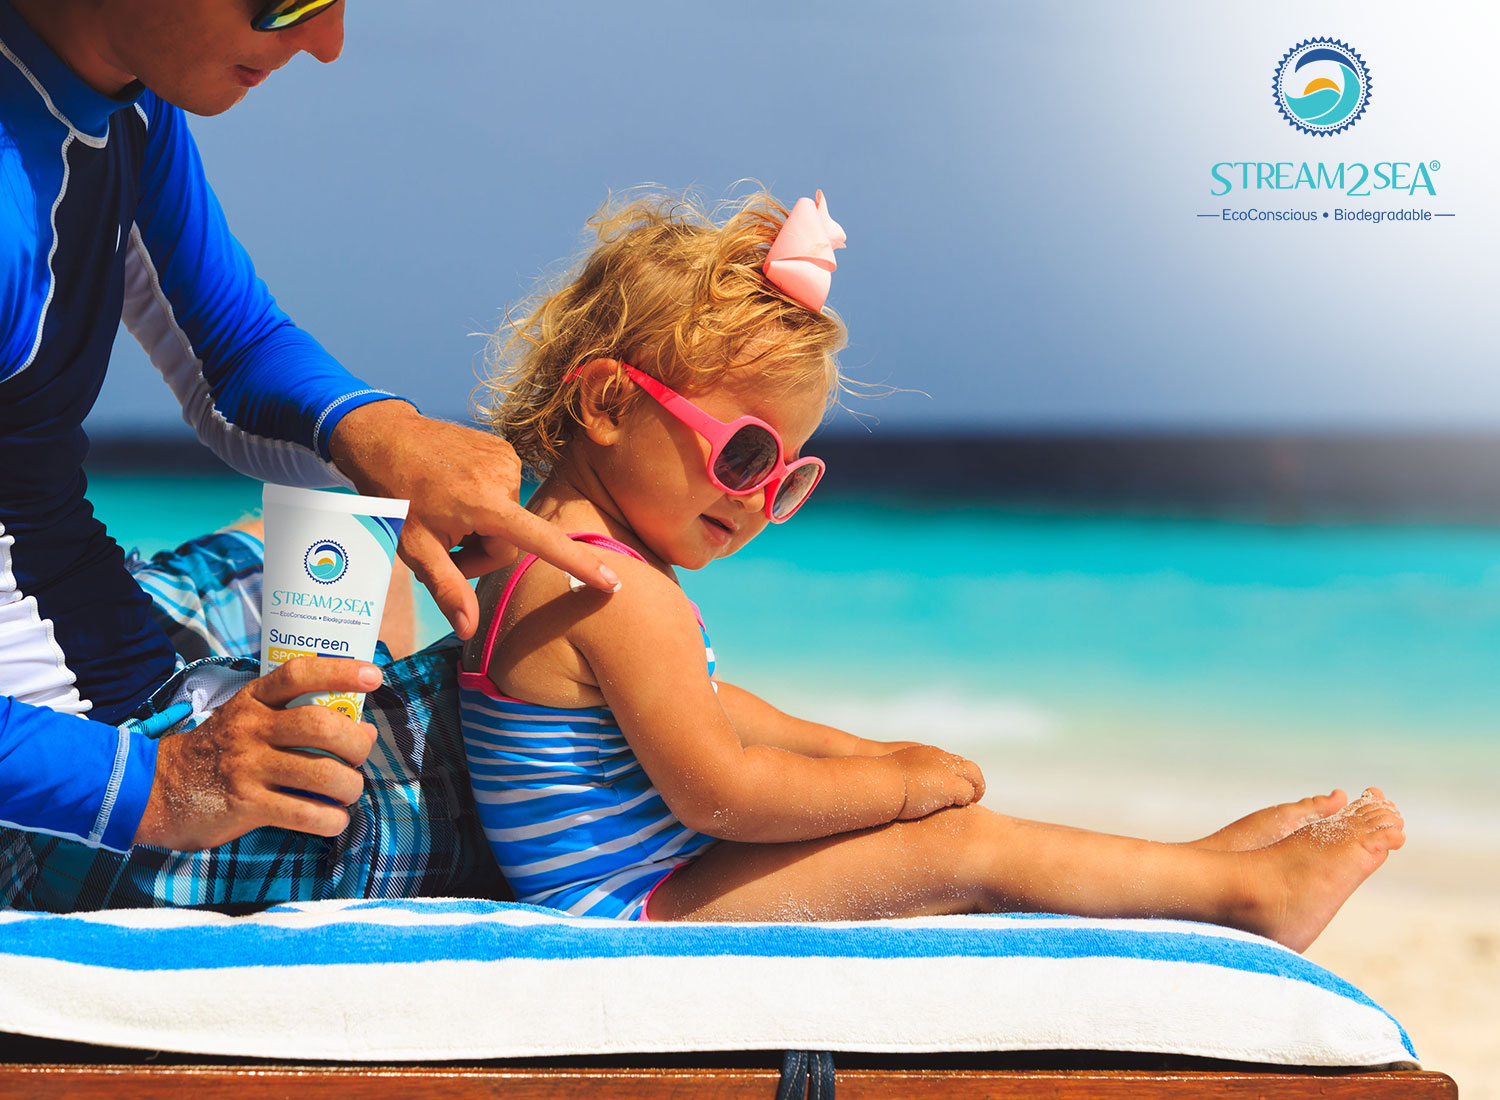 Stream2Sea Sustainable Sunscreen Shop for in the PADI Loves Marketplace